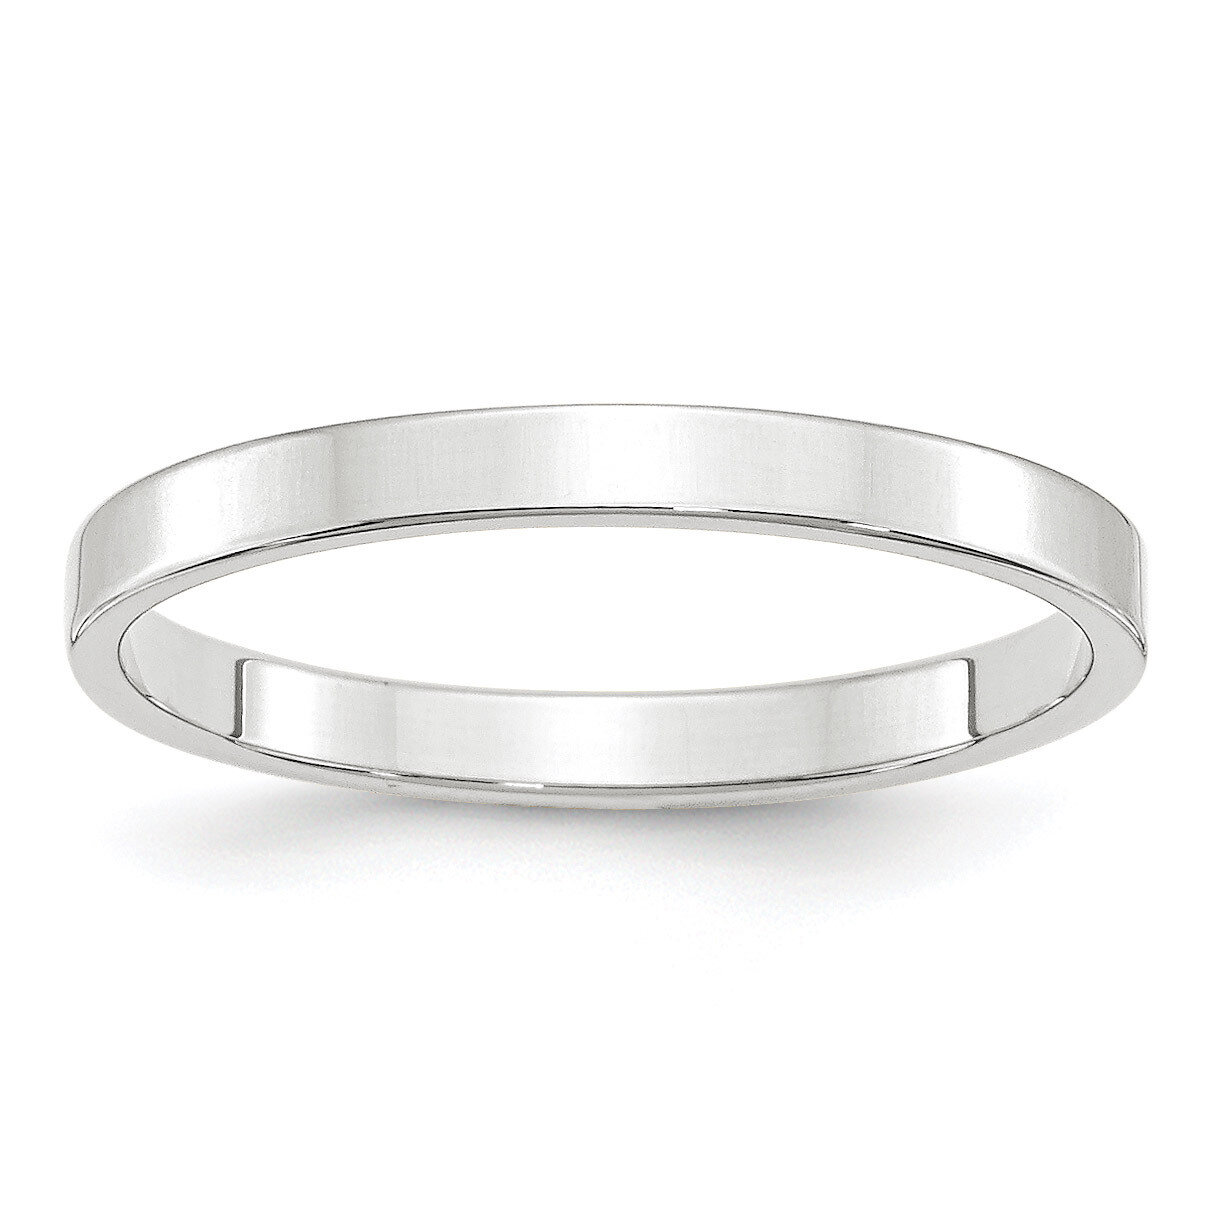 2.5mm Lightweight Flat Band 10k White Gold WFLL025 Engravable